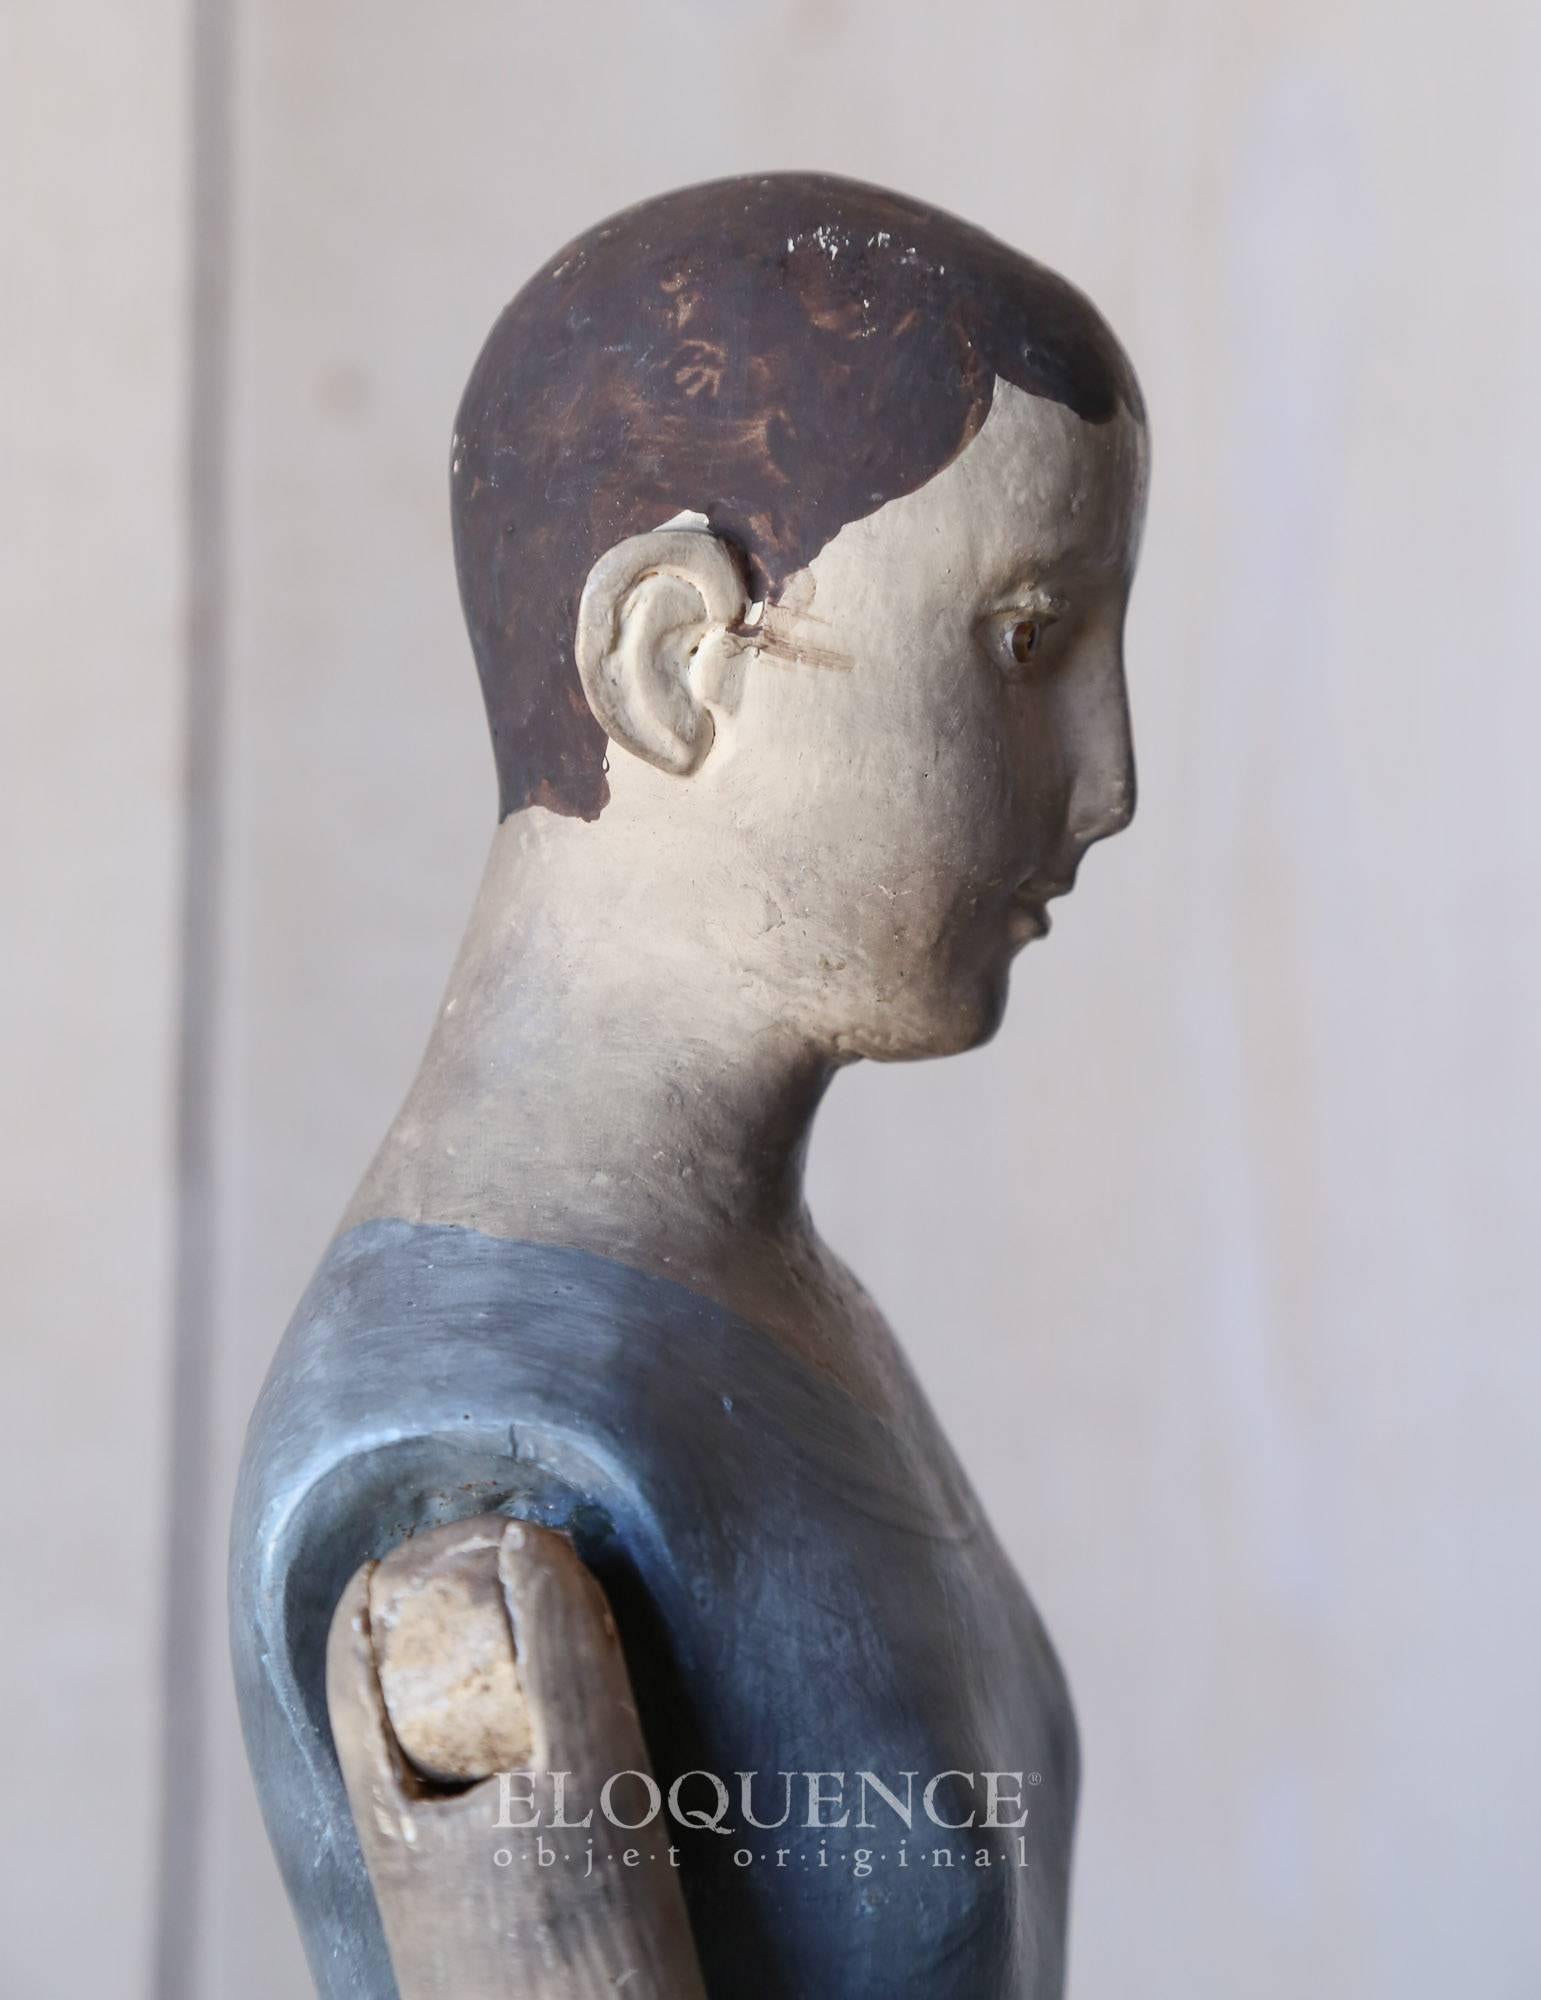 Antique sculptor's figurine from Provence. Made from wood and plaster. A beautiful object to add interest to your home.